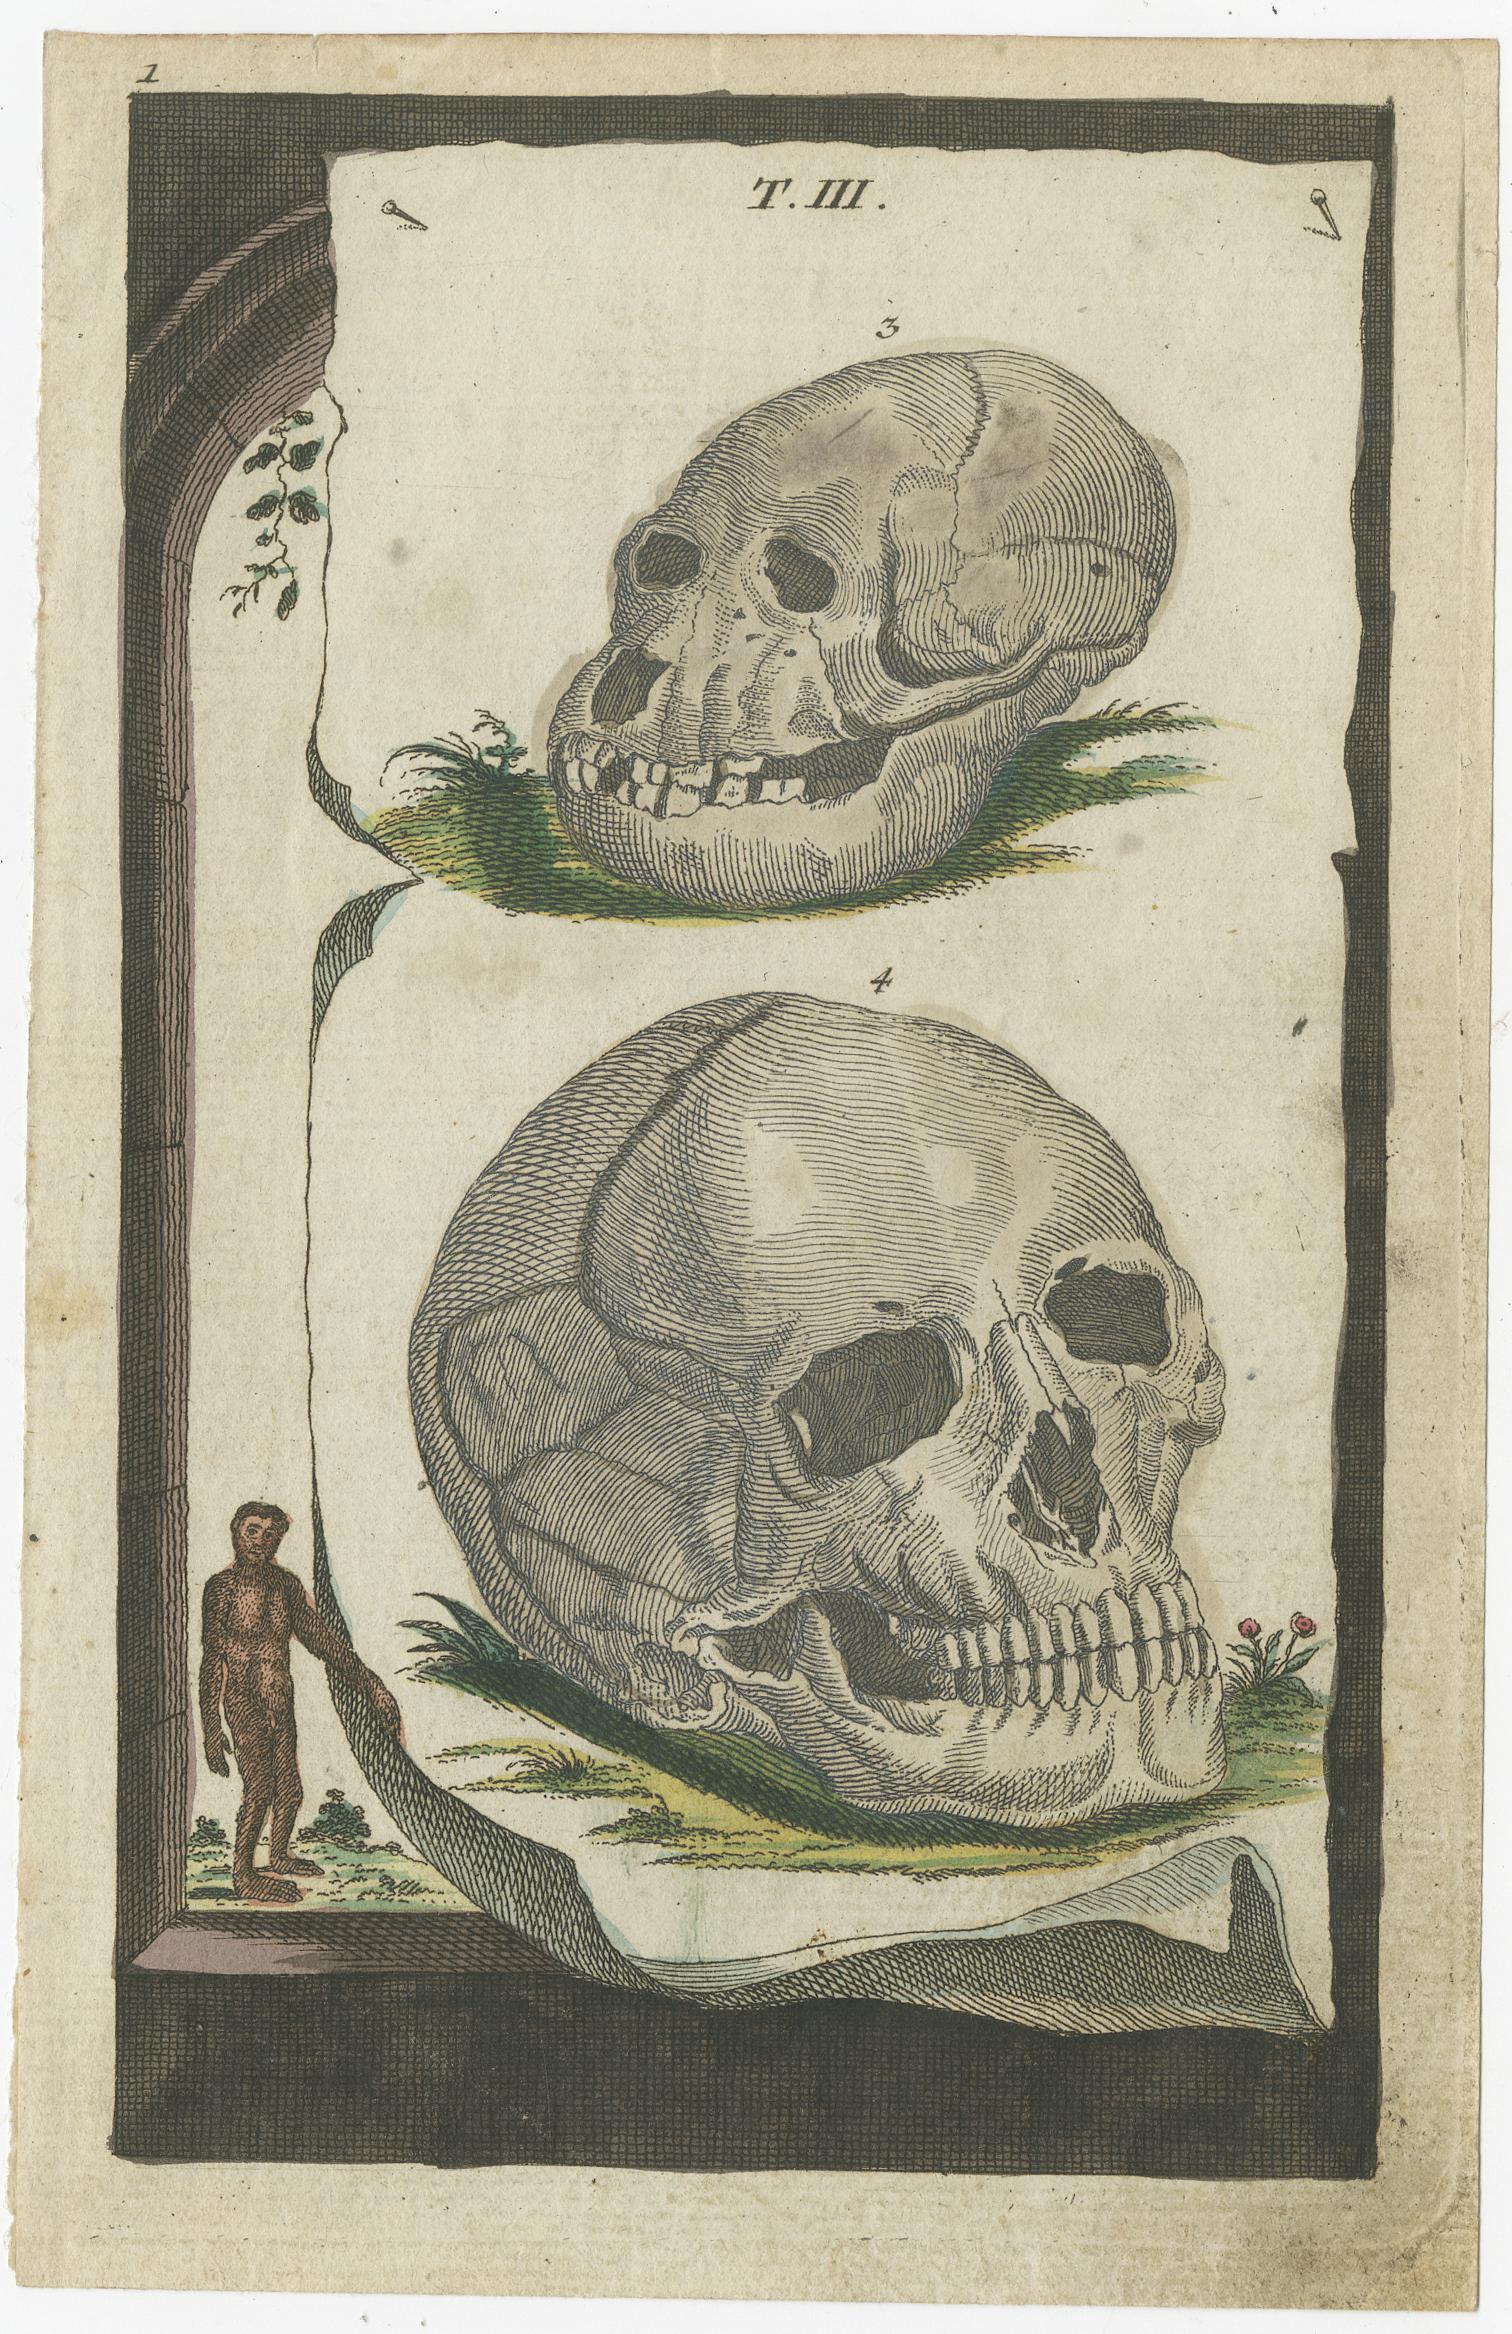 Small original antique print with two skulls. Source unknown, to be determined. Published circa 1790.